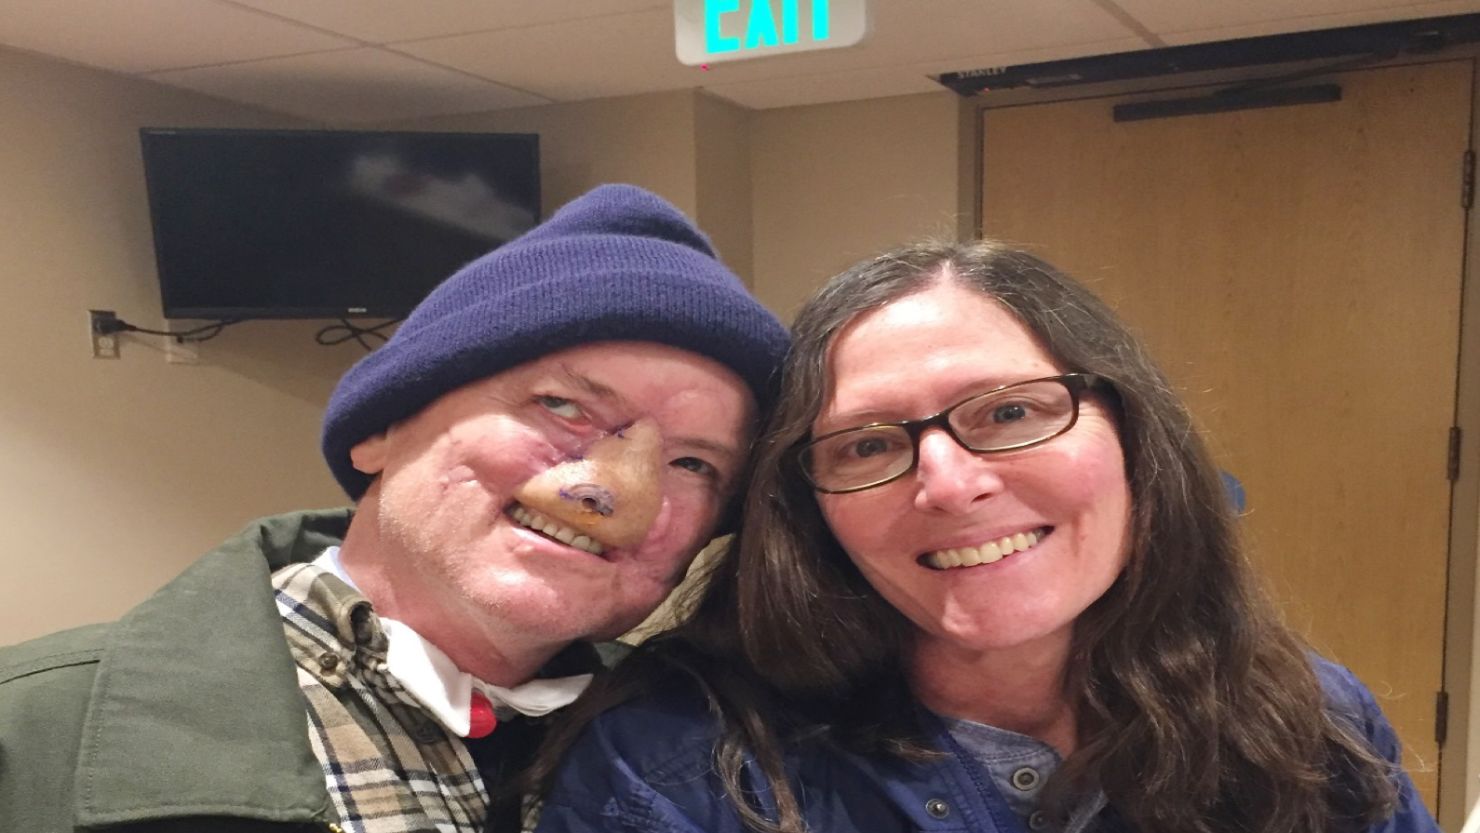 Lee Brooke survived a grizzly bear attack in October 2016. He said he wanted to survive to see his wife, Martha, again.